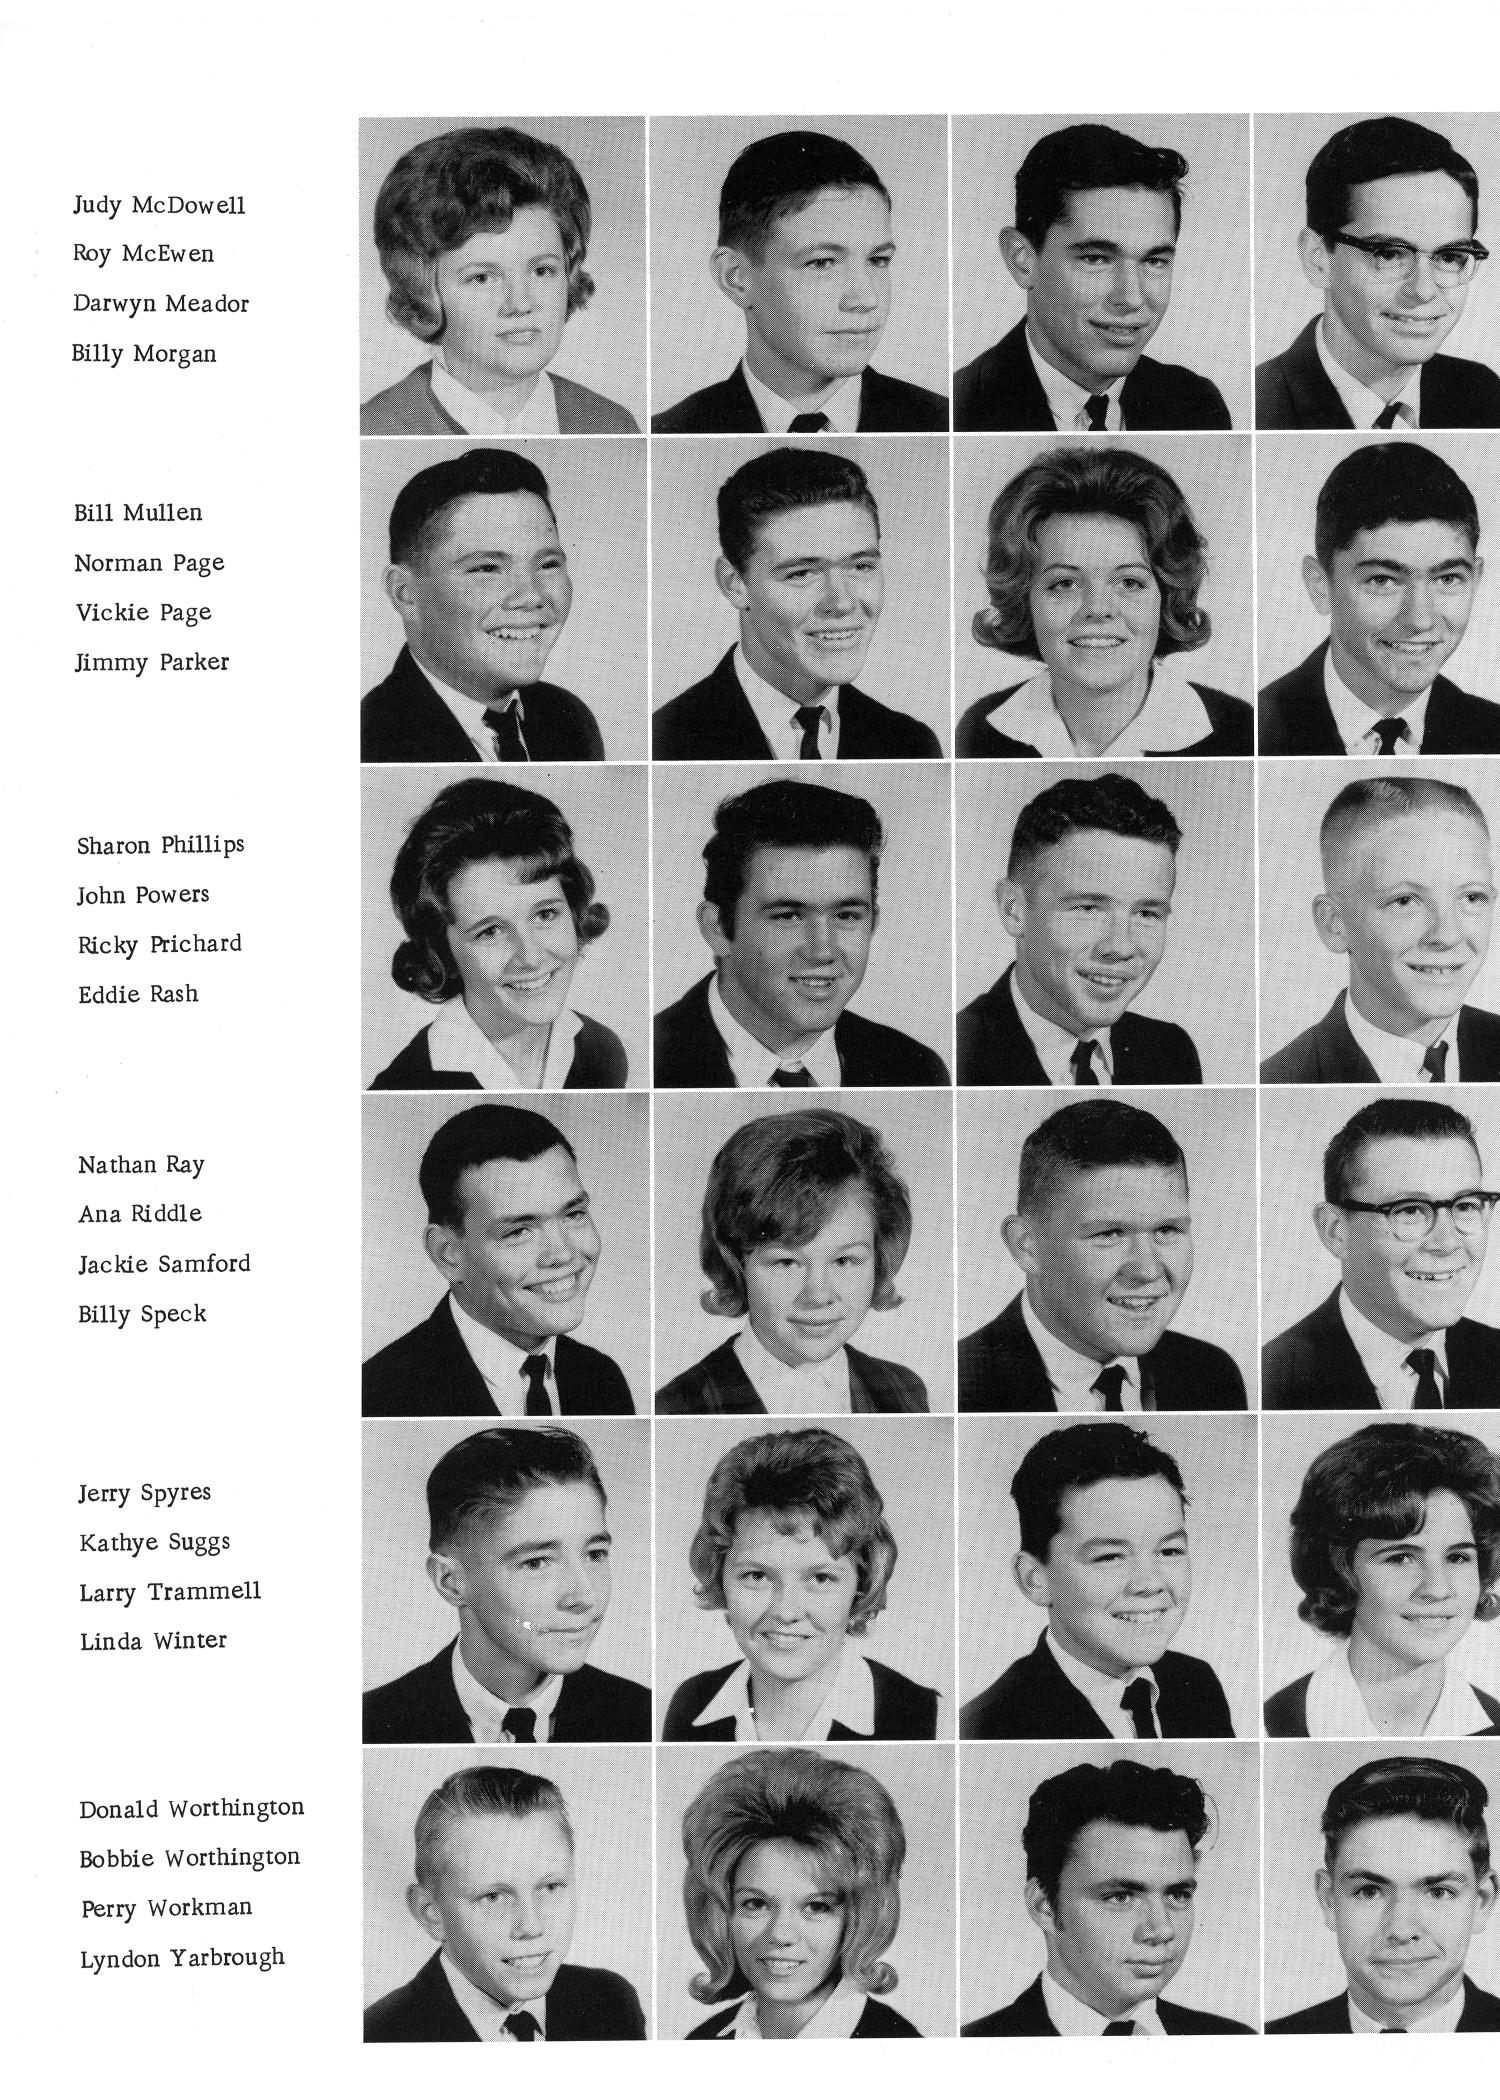 The Hornet, Yearbook of Aspermont Students, 1965